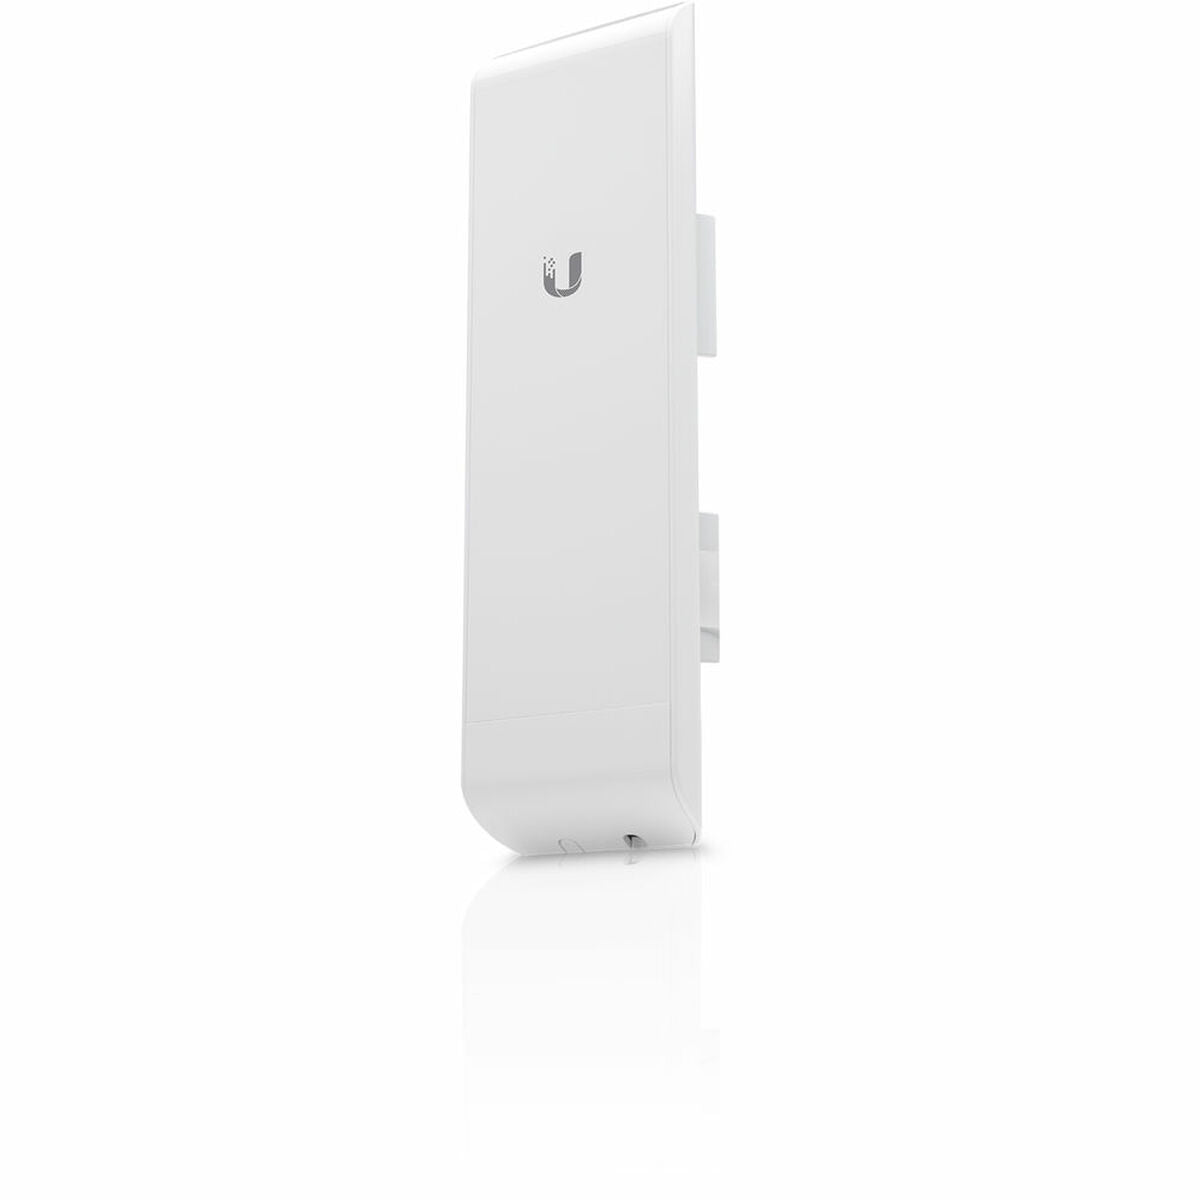 Access point UBIQUITI NSM2 2,4 Ghz 150 Mbit/s White, UBIQUITI, DIY and tools, Prevention and safety, access-point-ubiquiti-nsm2-2-4-ghz-150-mbit-s-white, Brand_UBIQUITI, category-reference-2609, category-reference-2803, category-reference-2820, category-reference-t-15436, category-reference-t-15495, category-reference-t-19651, category-reference-t-21086, category-reference-t-25211, category-reference-t-29099, Condition_NEW, ferretería, Price_100 - 200, RiotNook